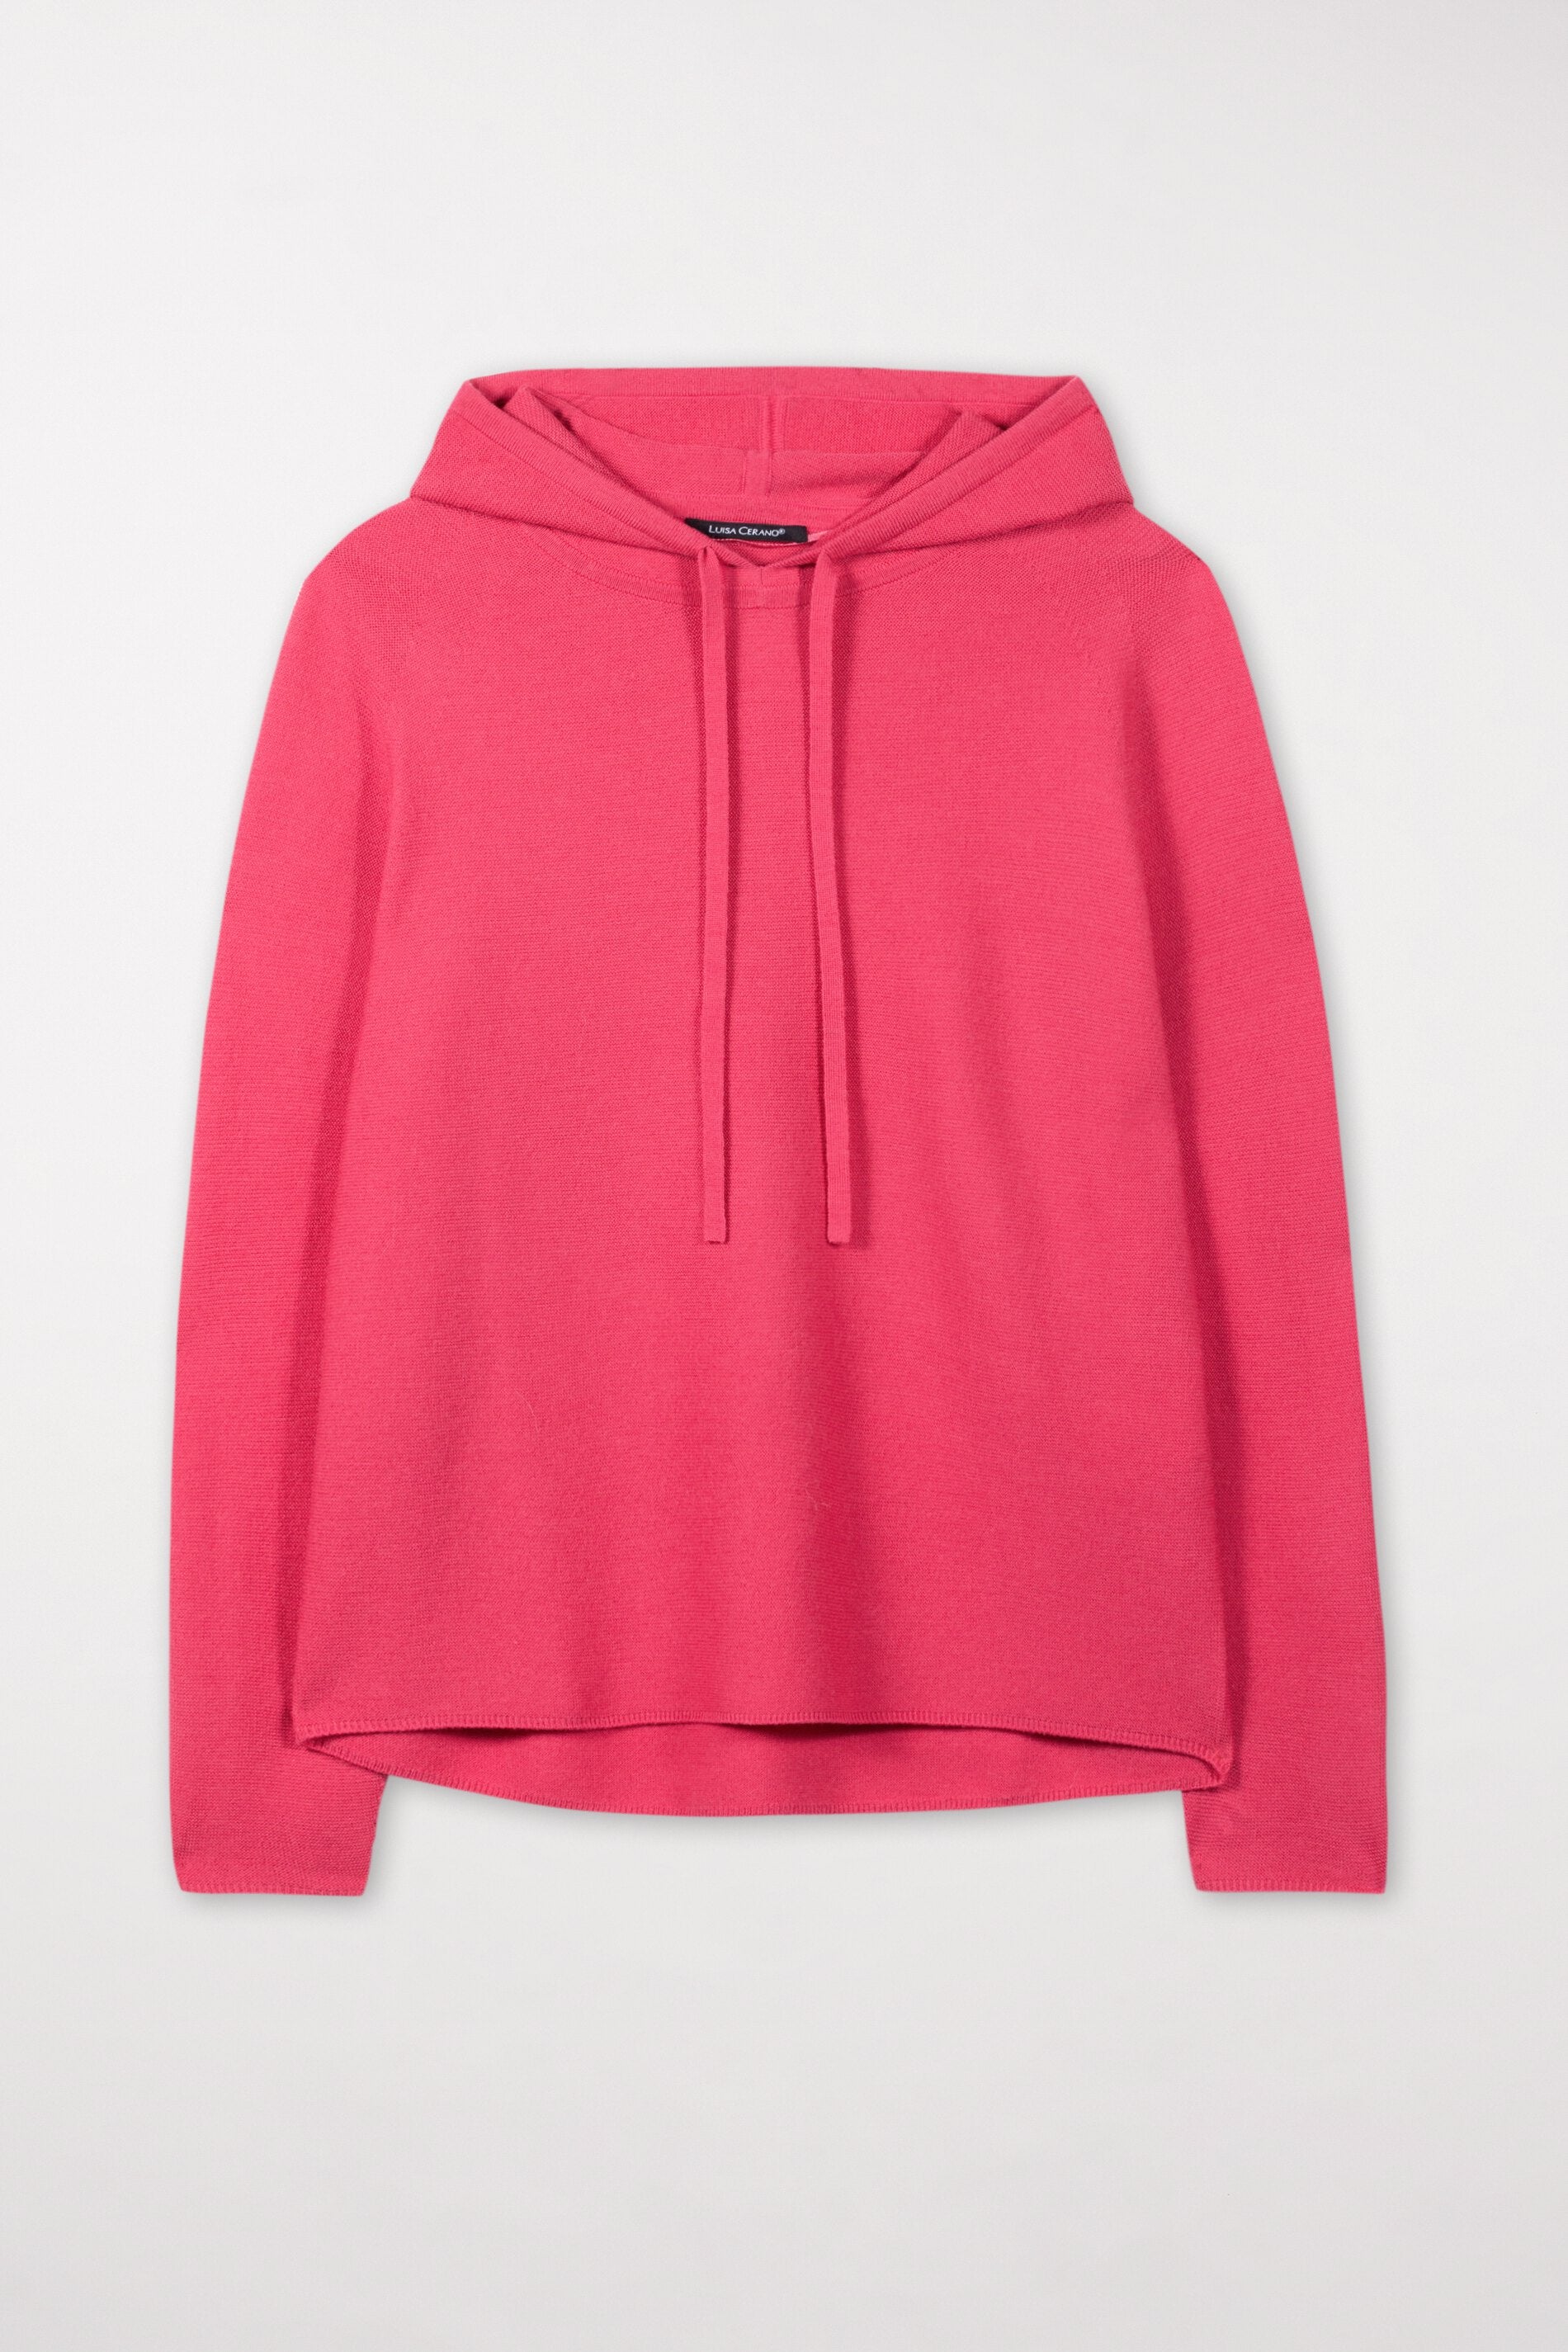 LUISA CERANO-OUTLET-SALE-Hoodie aus Woll-Mix-Strick-34-smoky pink-by-ARCHIVIST